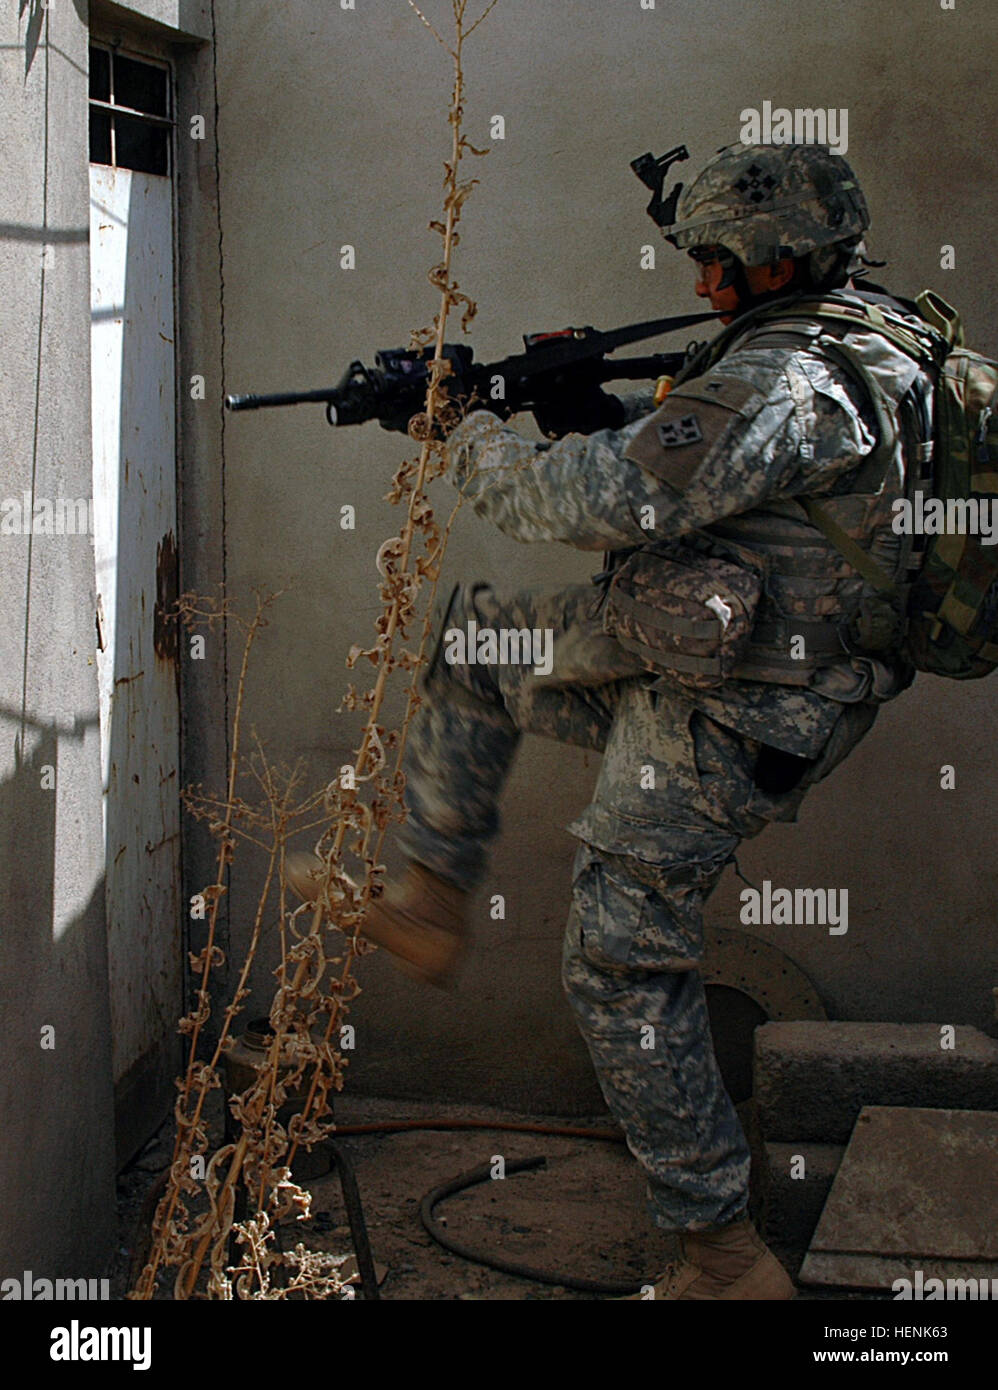 Spc. Mark Ramirez, an infantryman in 1st Platoon, Company D, 1st Battalion, 8th Infantry Regiment from Fort Carson, Colo., works to negotiate a locked door during a clearing operation in Mosul, Iraq, April 1. A car bomb factory, several bags of homemade explosives and bomb making materials were found and destroyed during the raid. Iraqi Army Division led raid on Mosul neighborhood finds car bomb factory 83282 Stock Photo